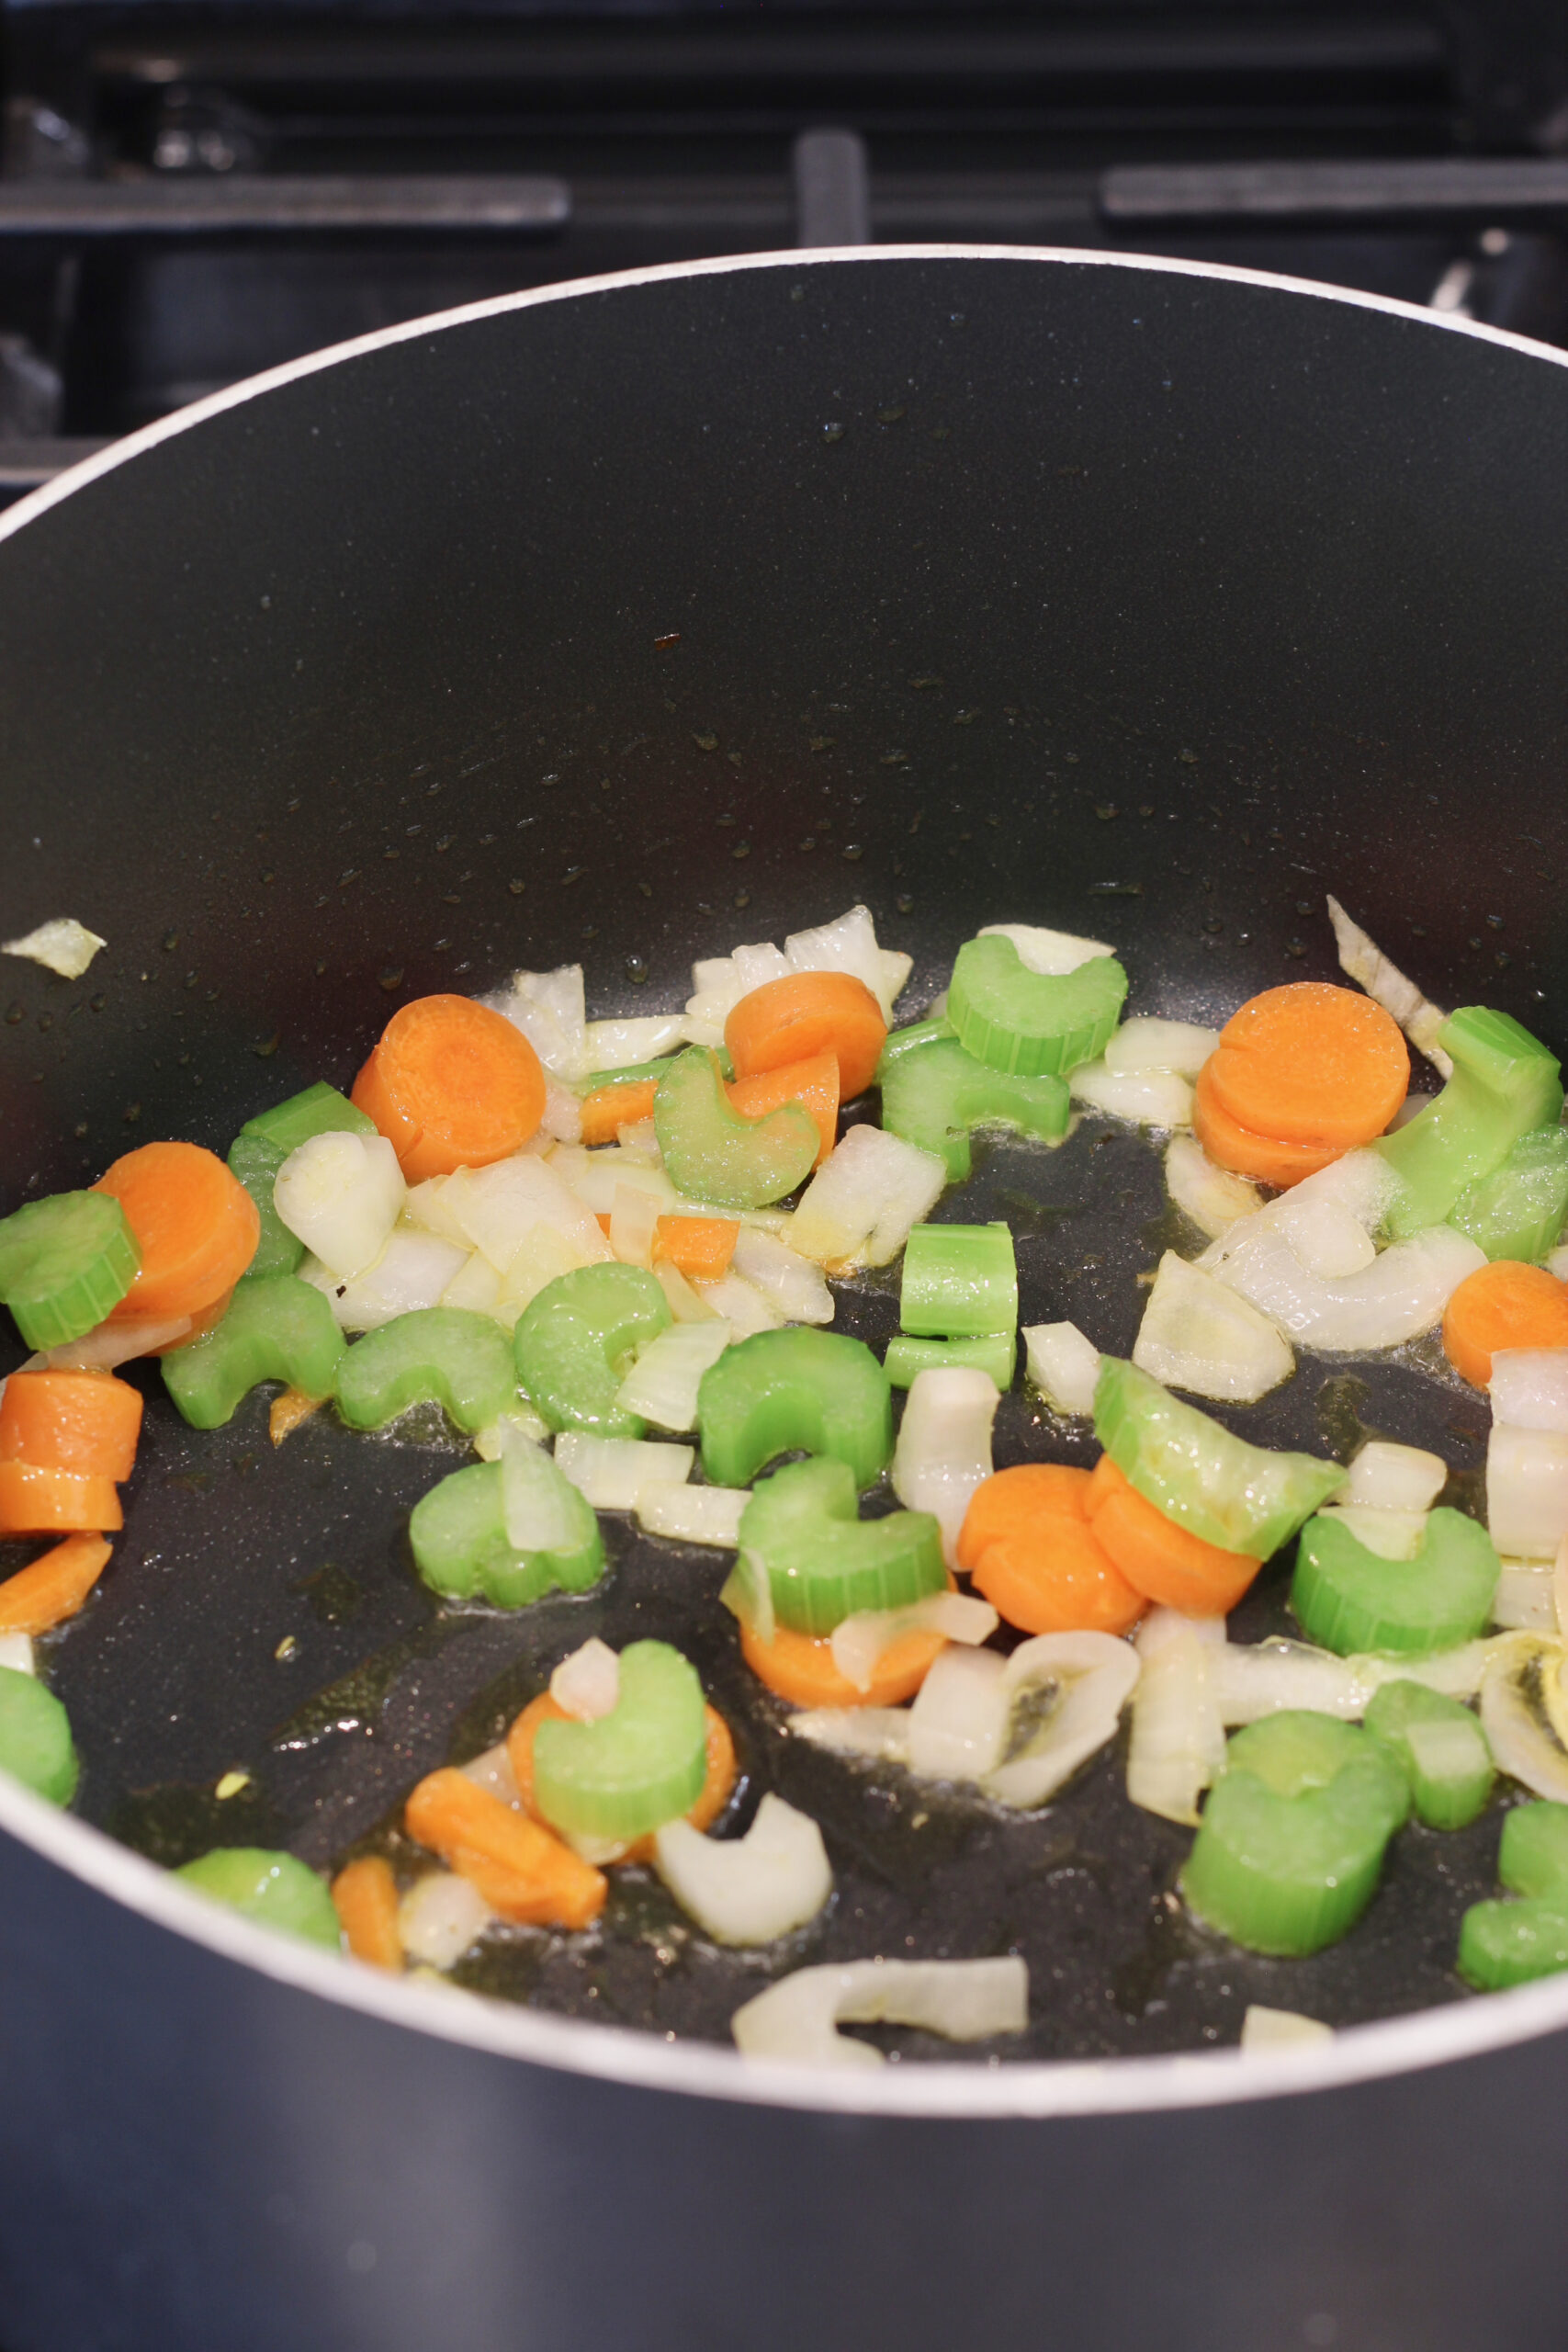 Celery, onion, and carrots cooking